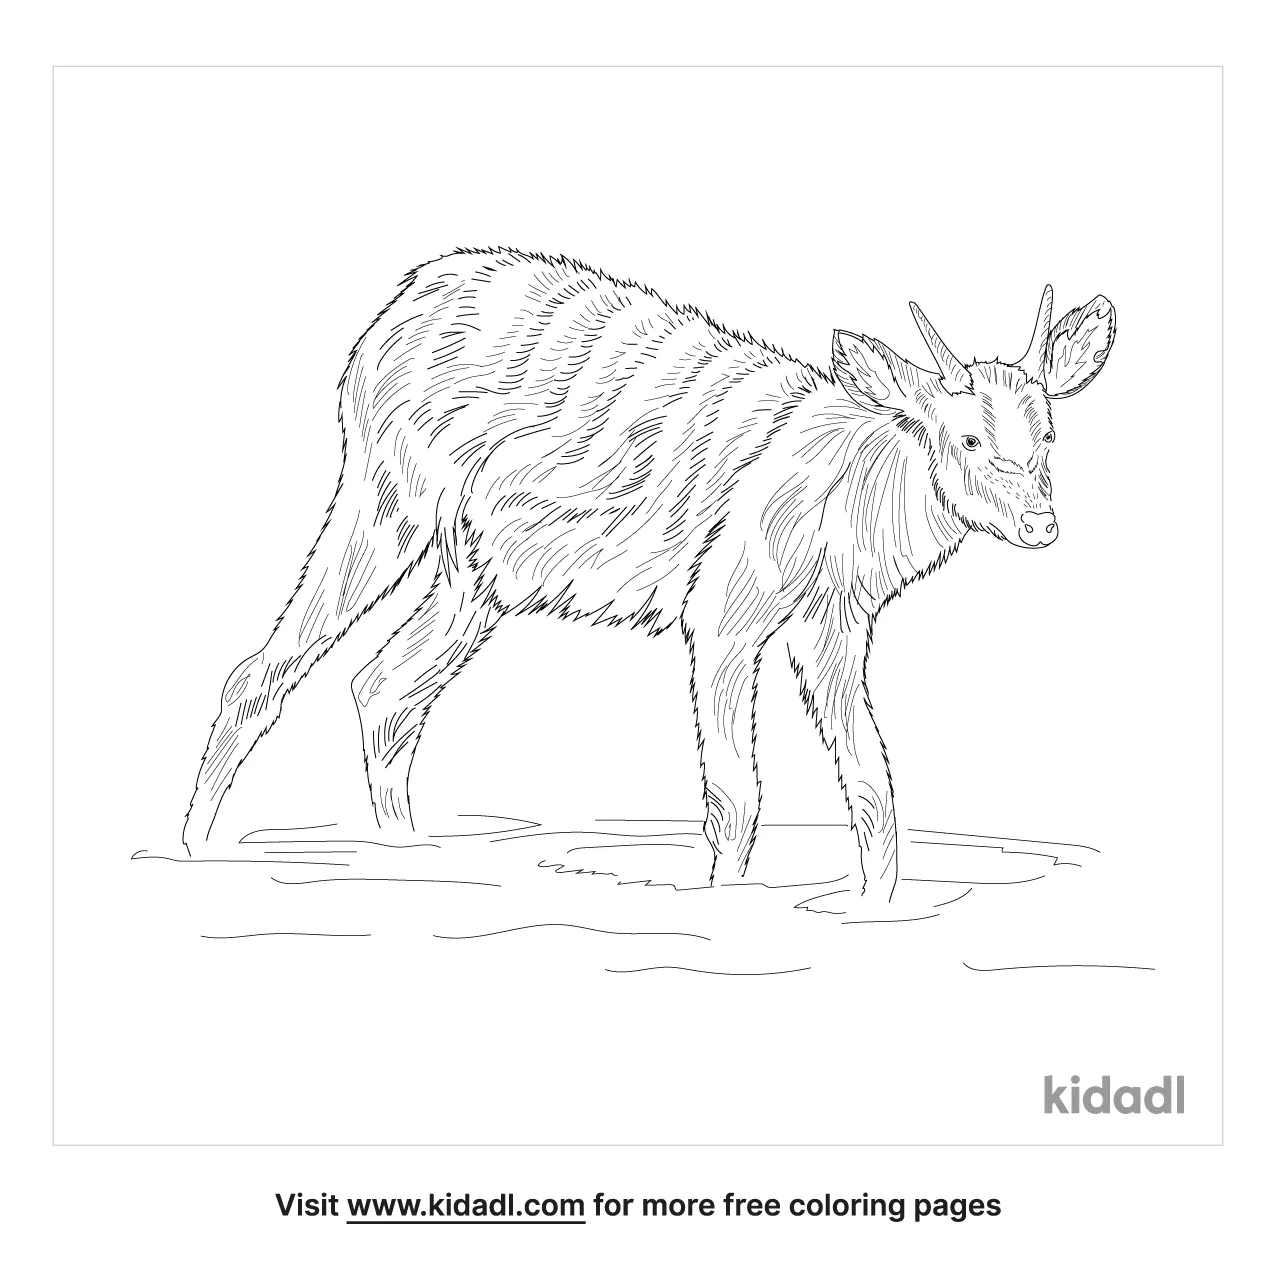 nigerian animals coloring pages